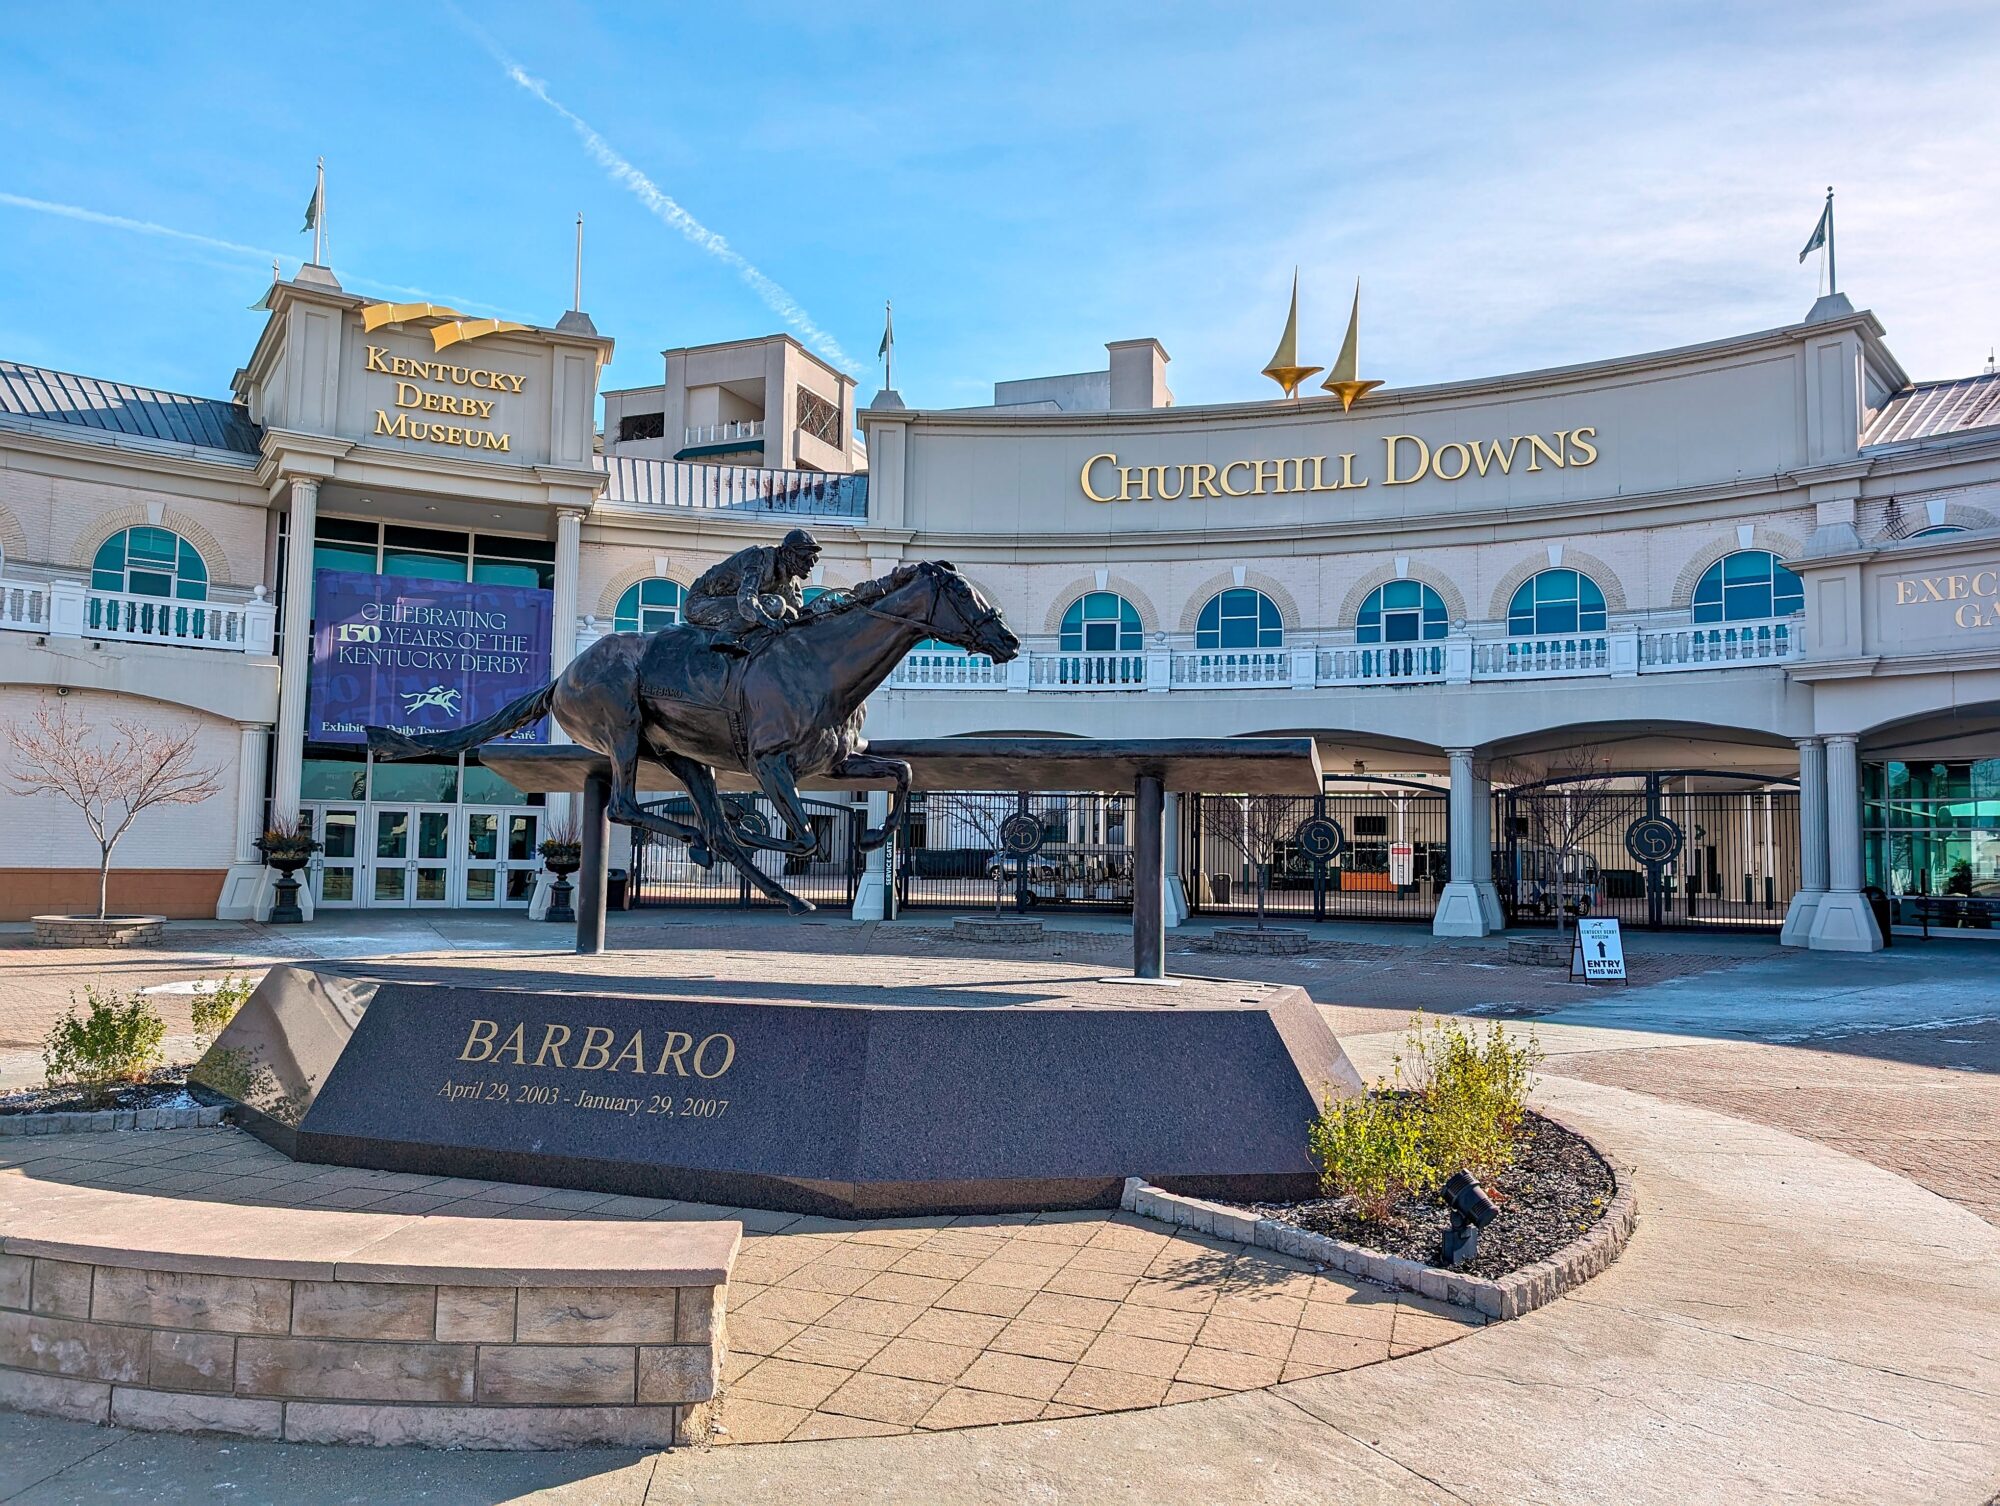 The entrance to the Kentucky Derby Museum